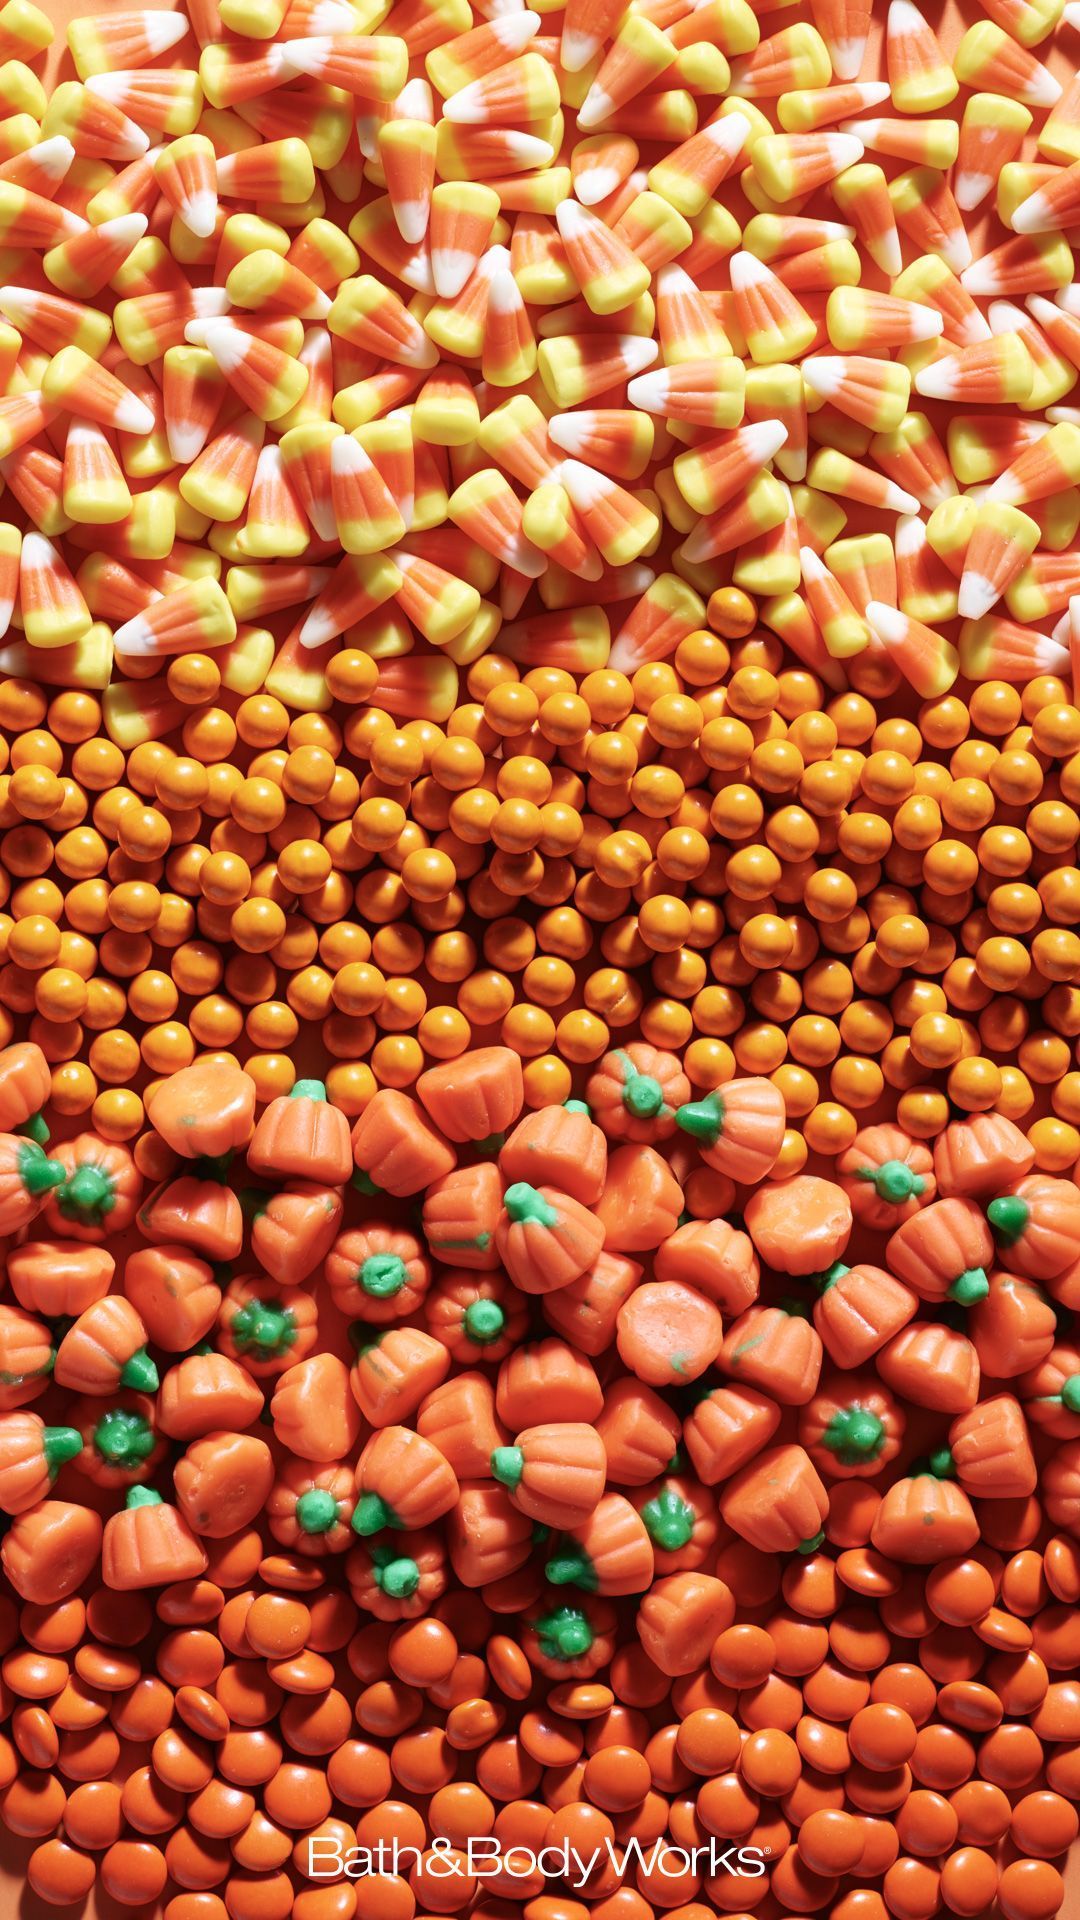 A close up of candy corn and other candies - Candy